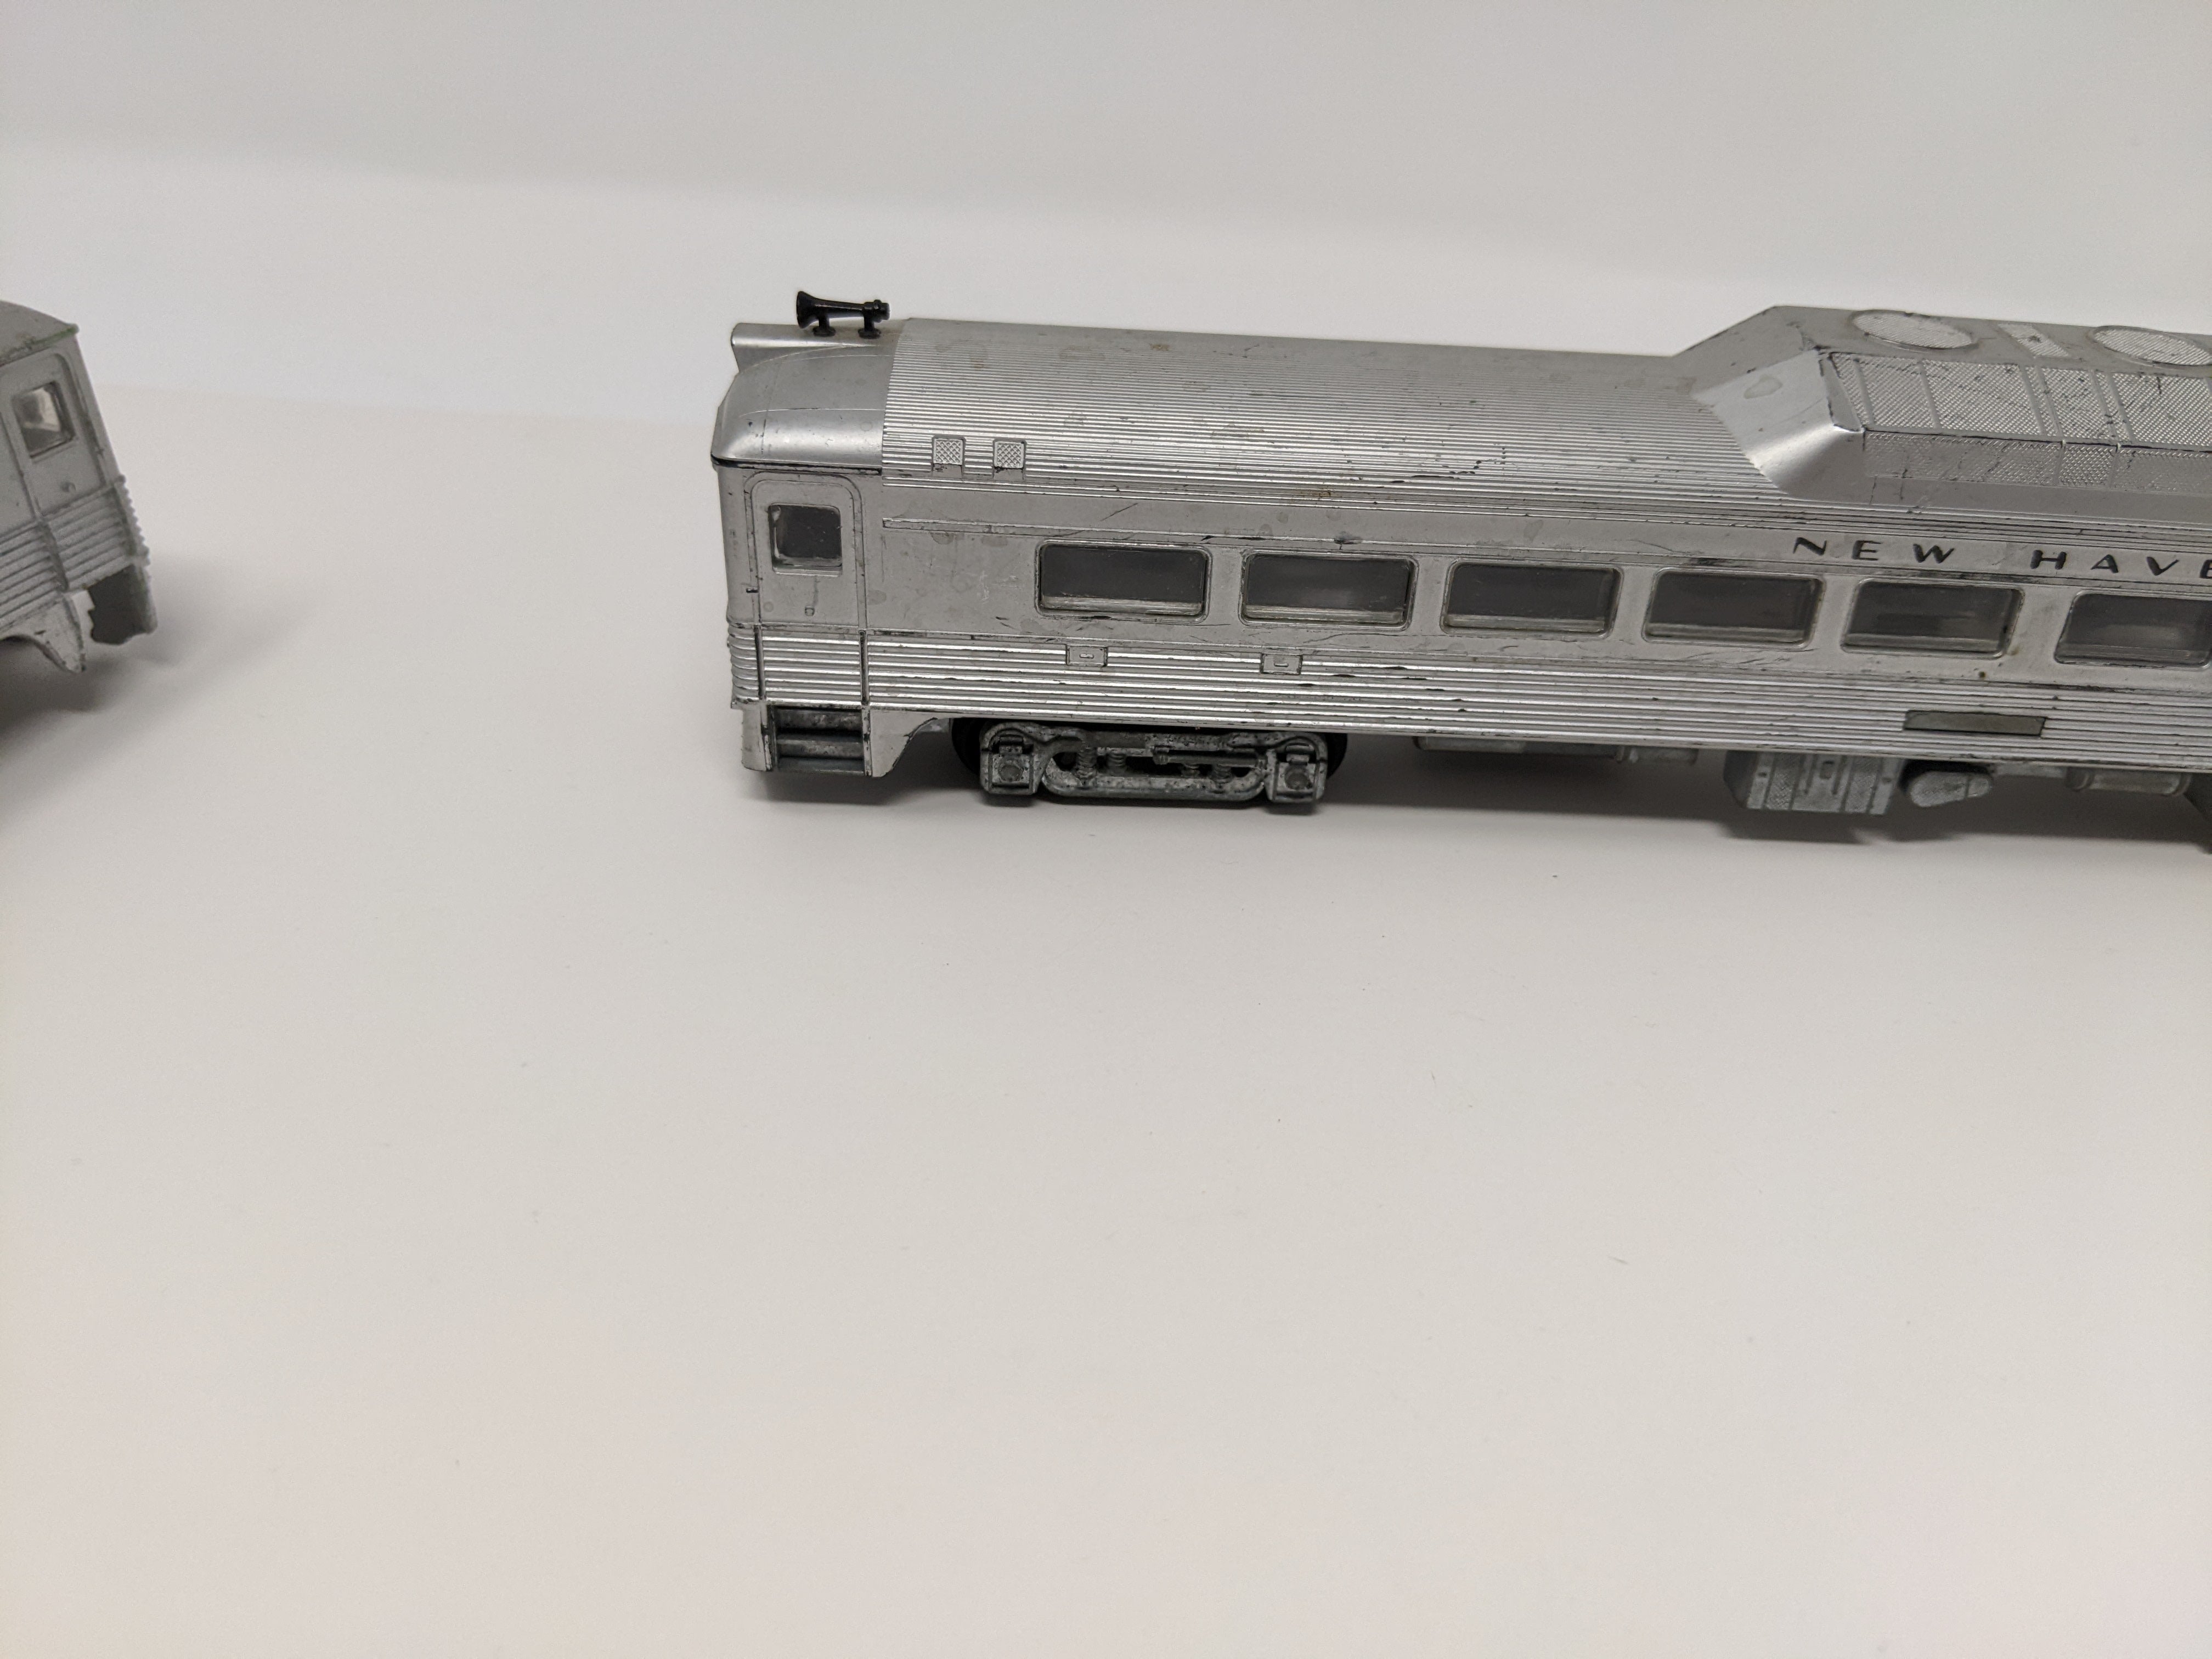 USED Athearn HO Scale, Lot of 2 Budd Cars (for parts or repairs), New Haven